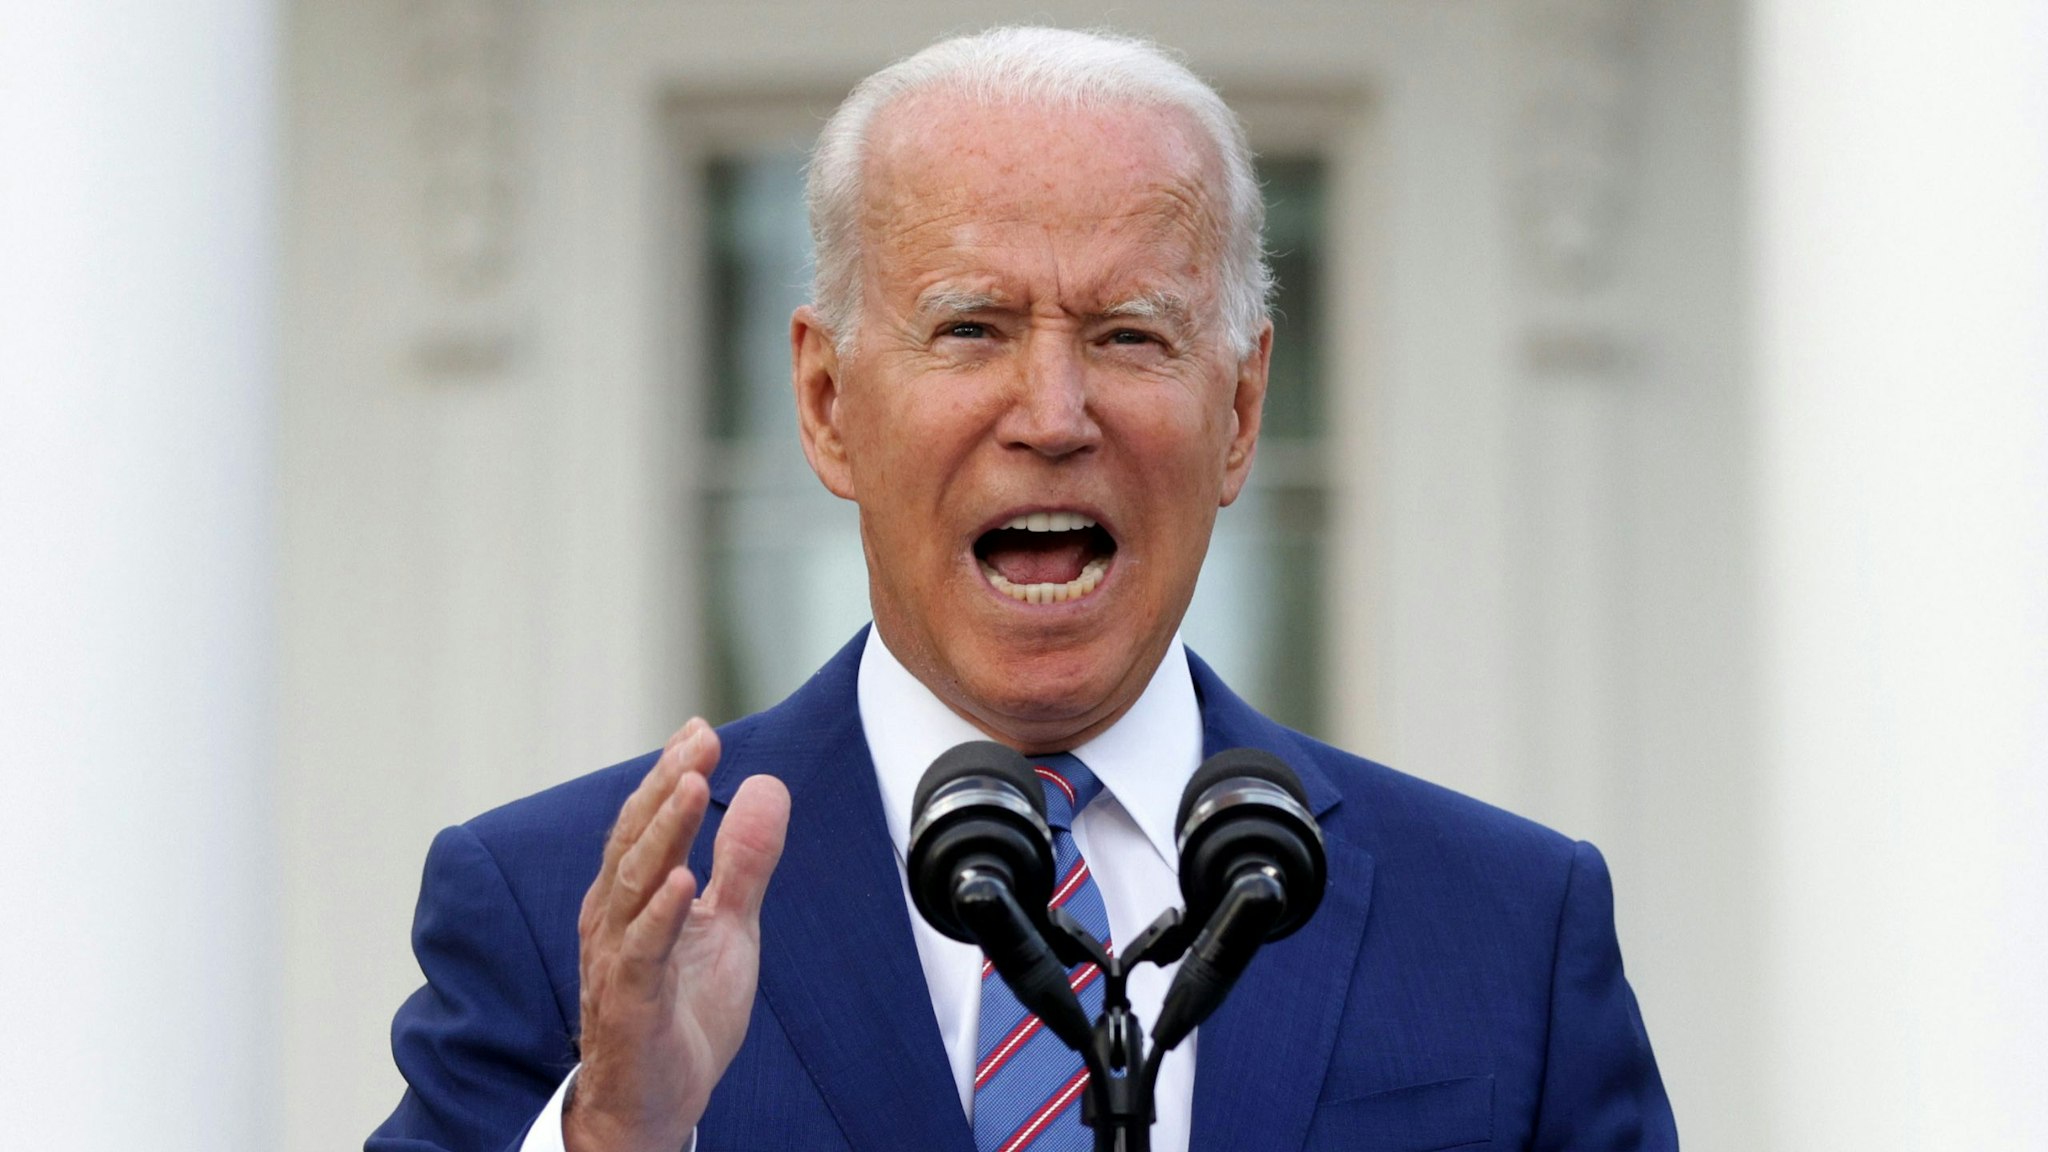 WASHINGTON, DC - JULY 04: U.S. President Joe Biden speaks during a Fourth of July BBQ event to celebrate Independence Day at the South Lawn of the White House July 4, 2021 in Washington, DC. President Biden and first lady Jill Biden hosted about 1,000 guests, including COVID response essential workers and military families, to celebrate the nation’s 245th birthday.